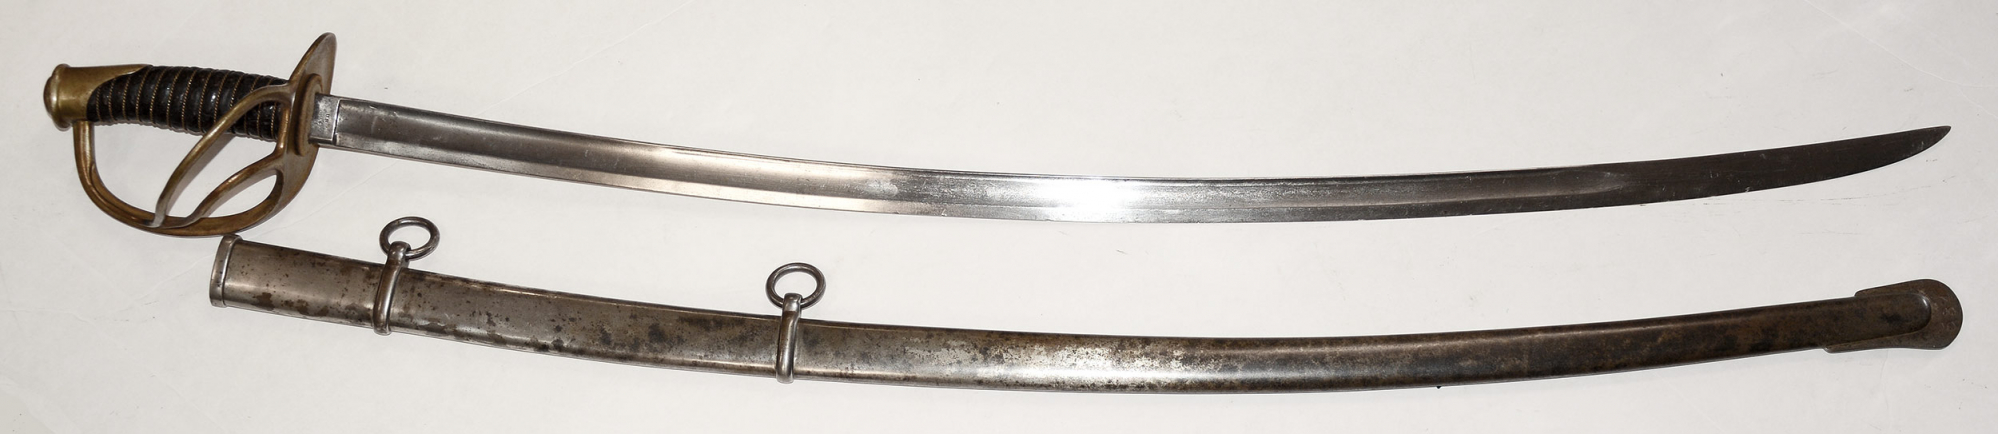 EXCELLENT MODEL 1860 CAVALRY SABER WITH SCABBARD